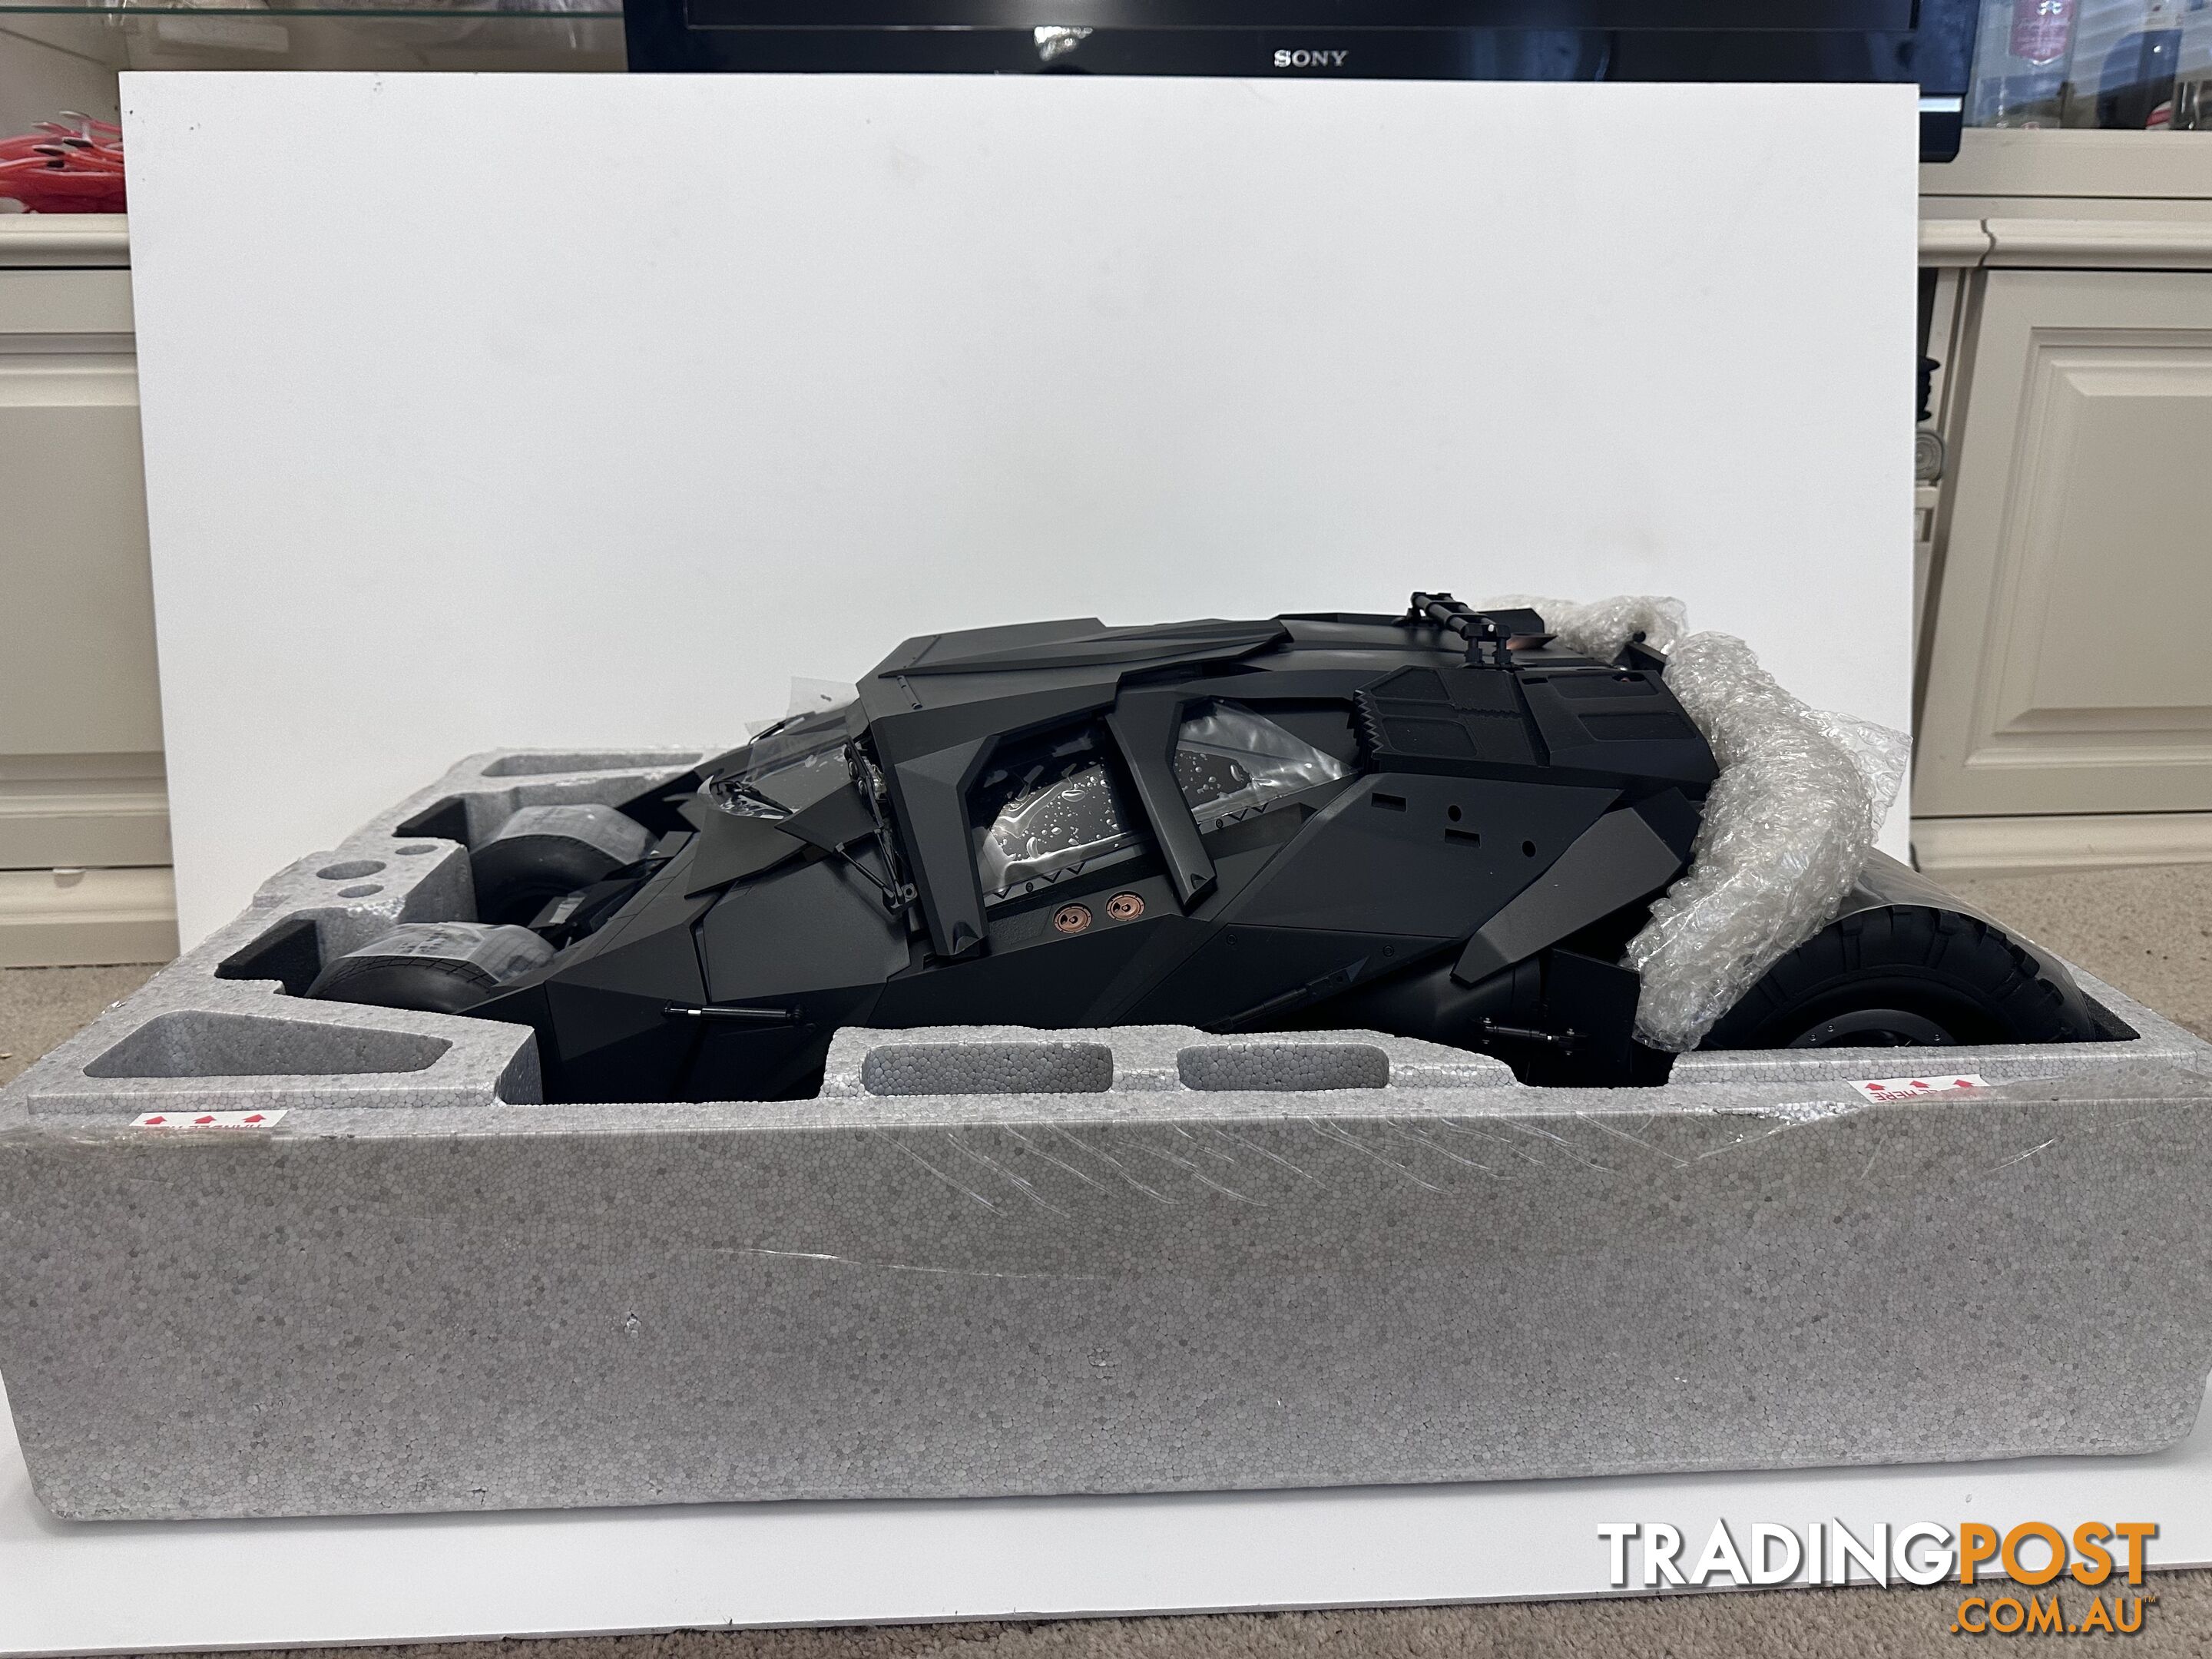 BATMOBILE Sixth Scale Vehicle Accessory by Hot Toys